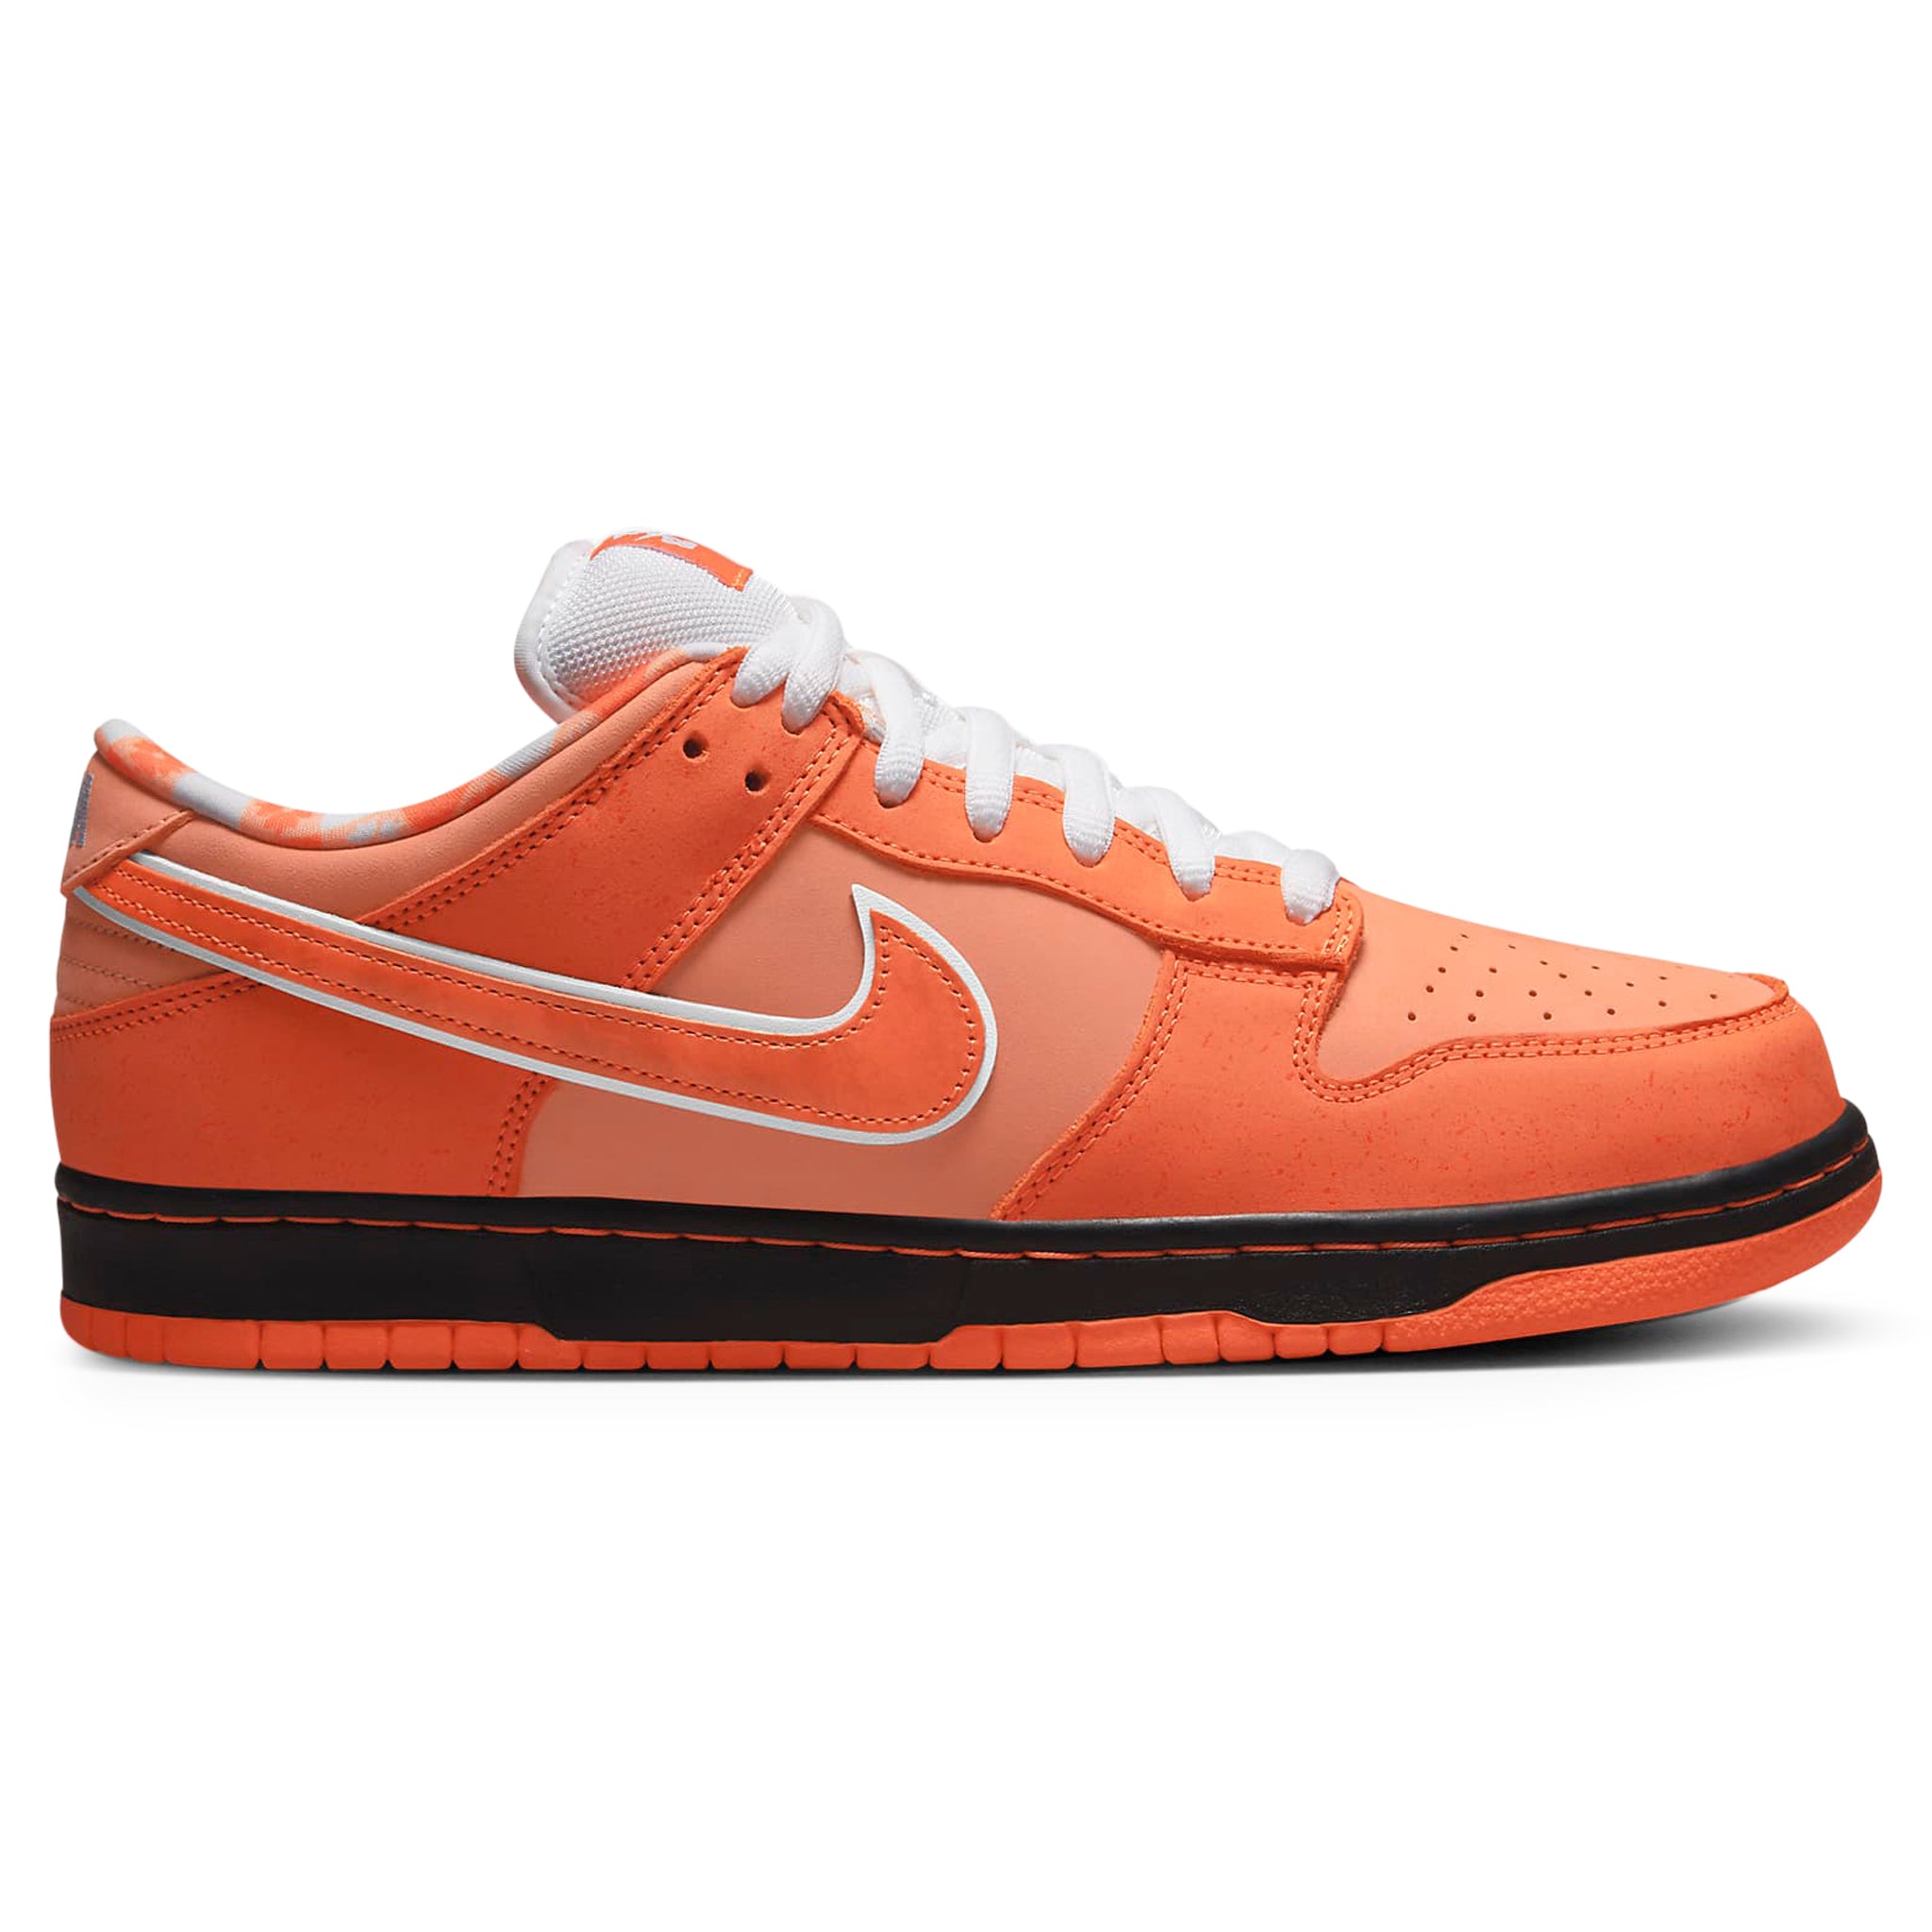 Side view of Nike SB Dunk Low Concepts Orange Lobster FD8776-800